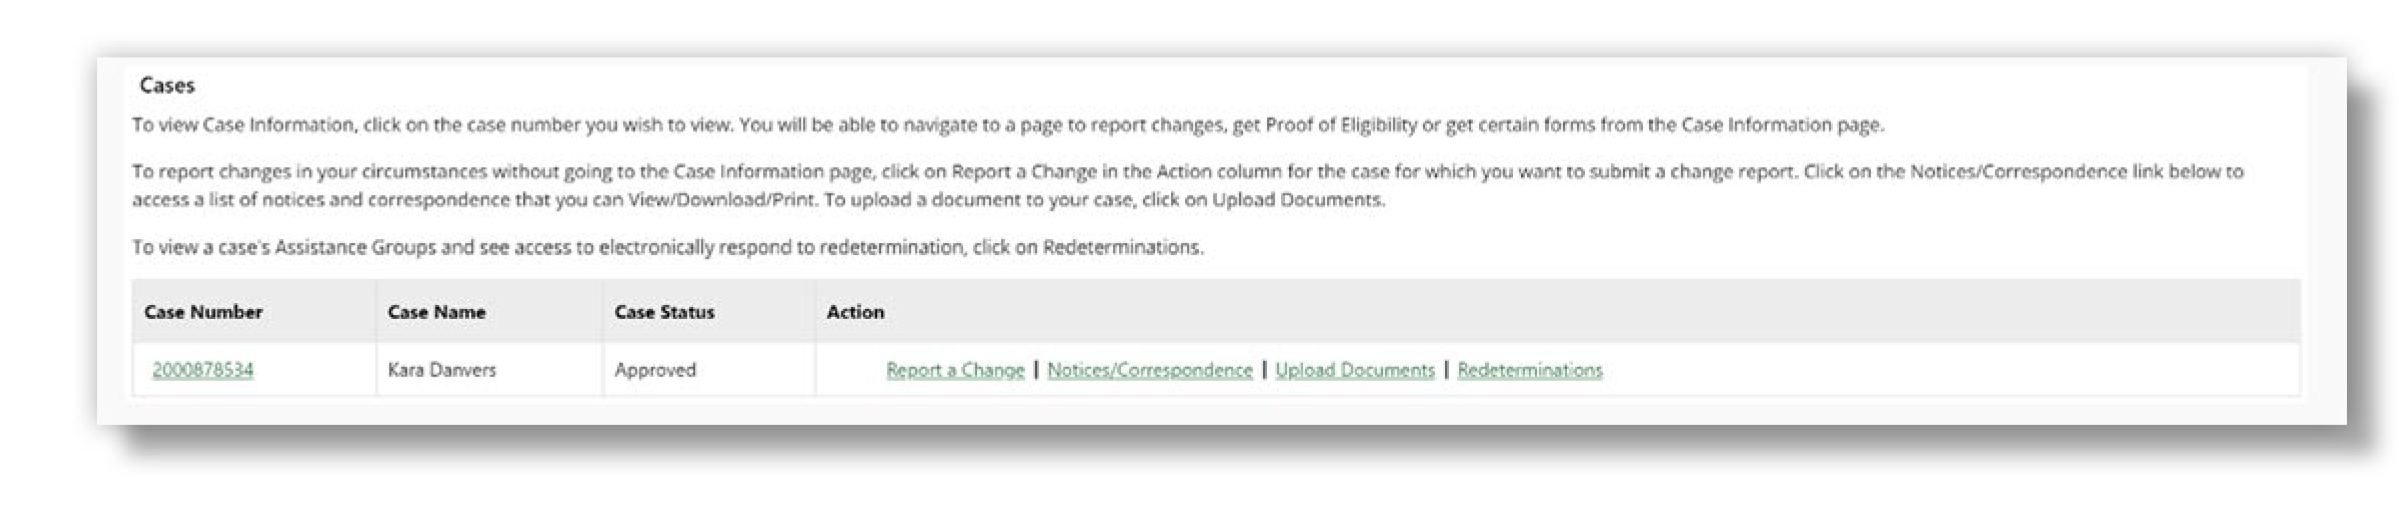 Screenshot of the Case Information Page on the FSSA Benefits Portal